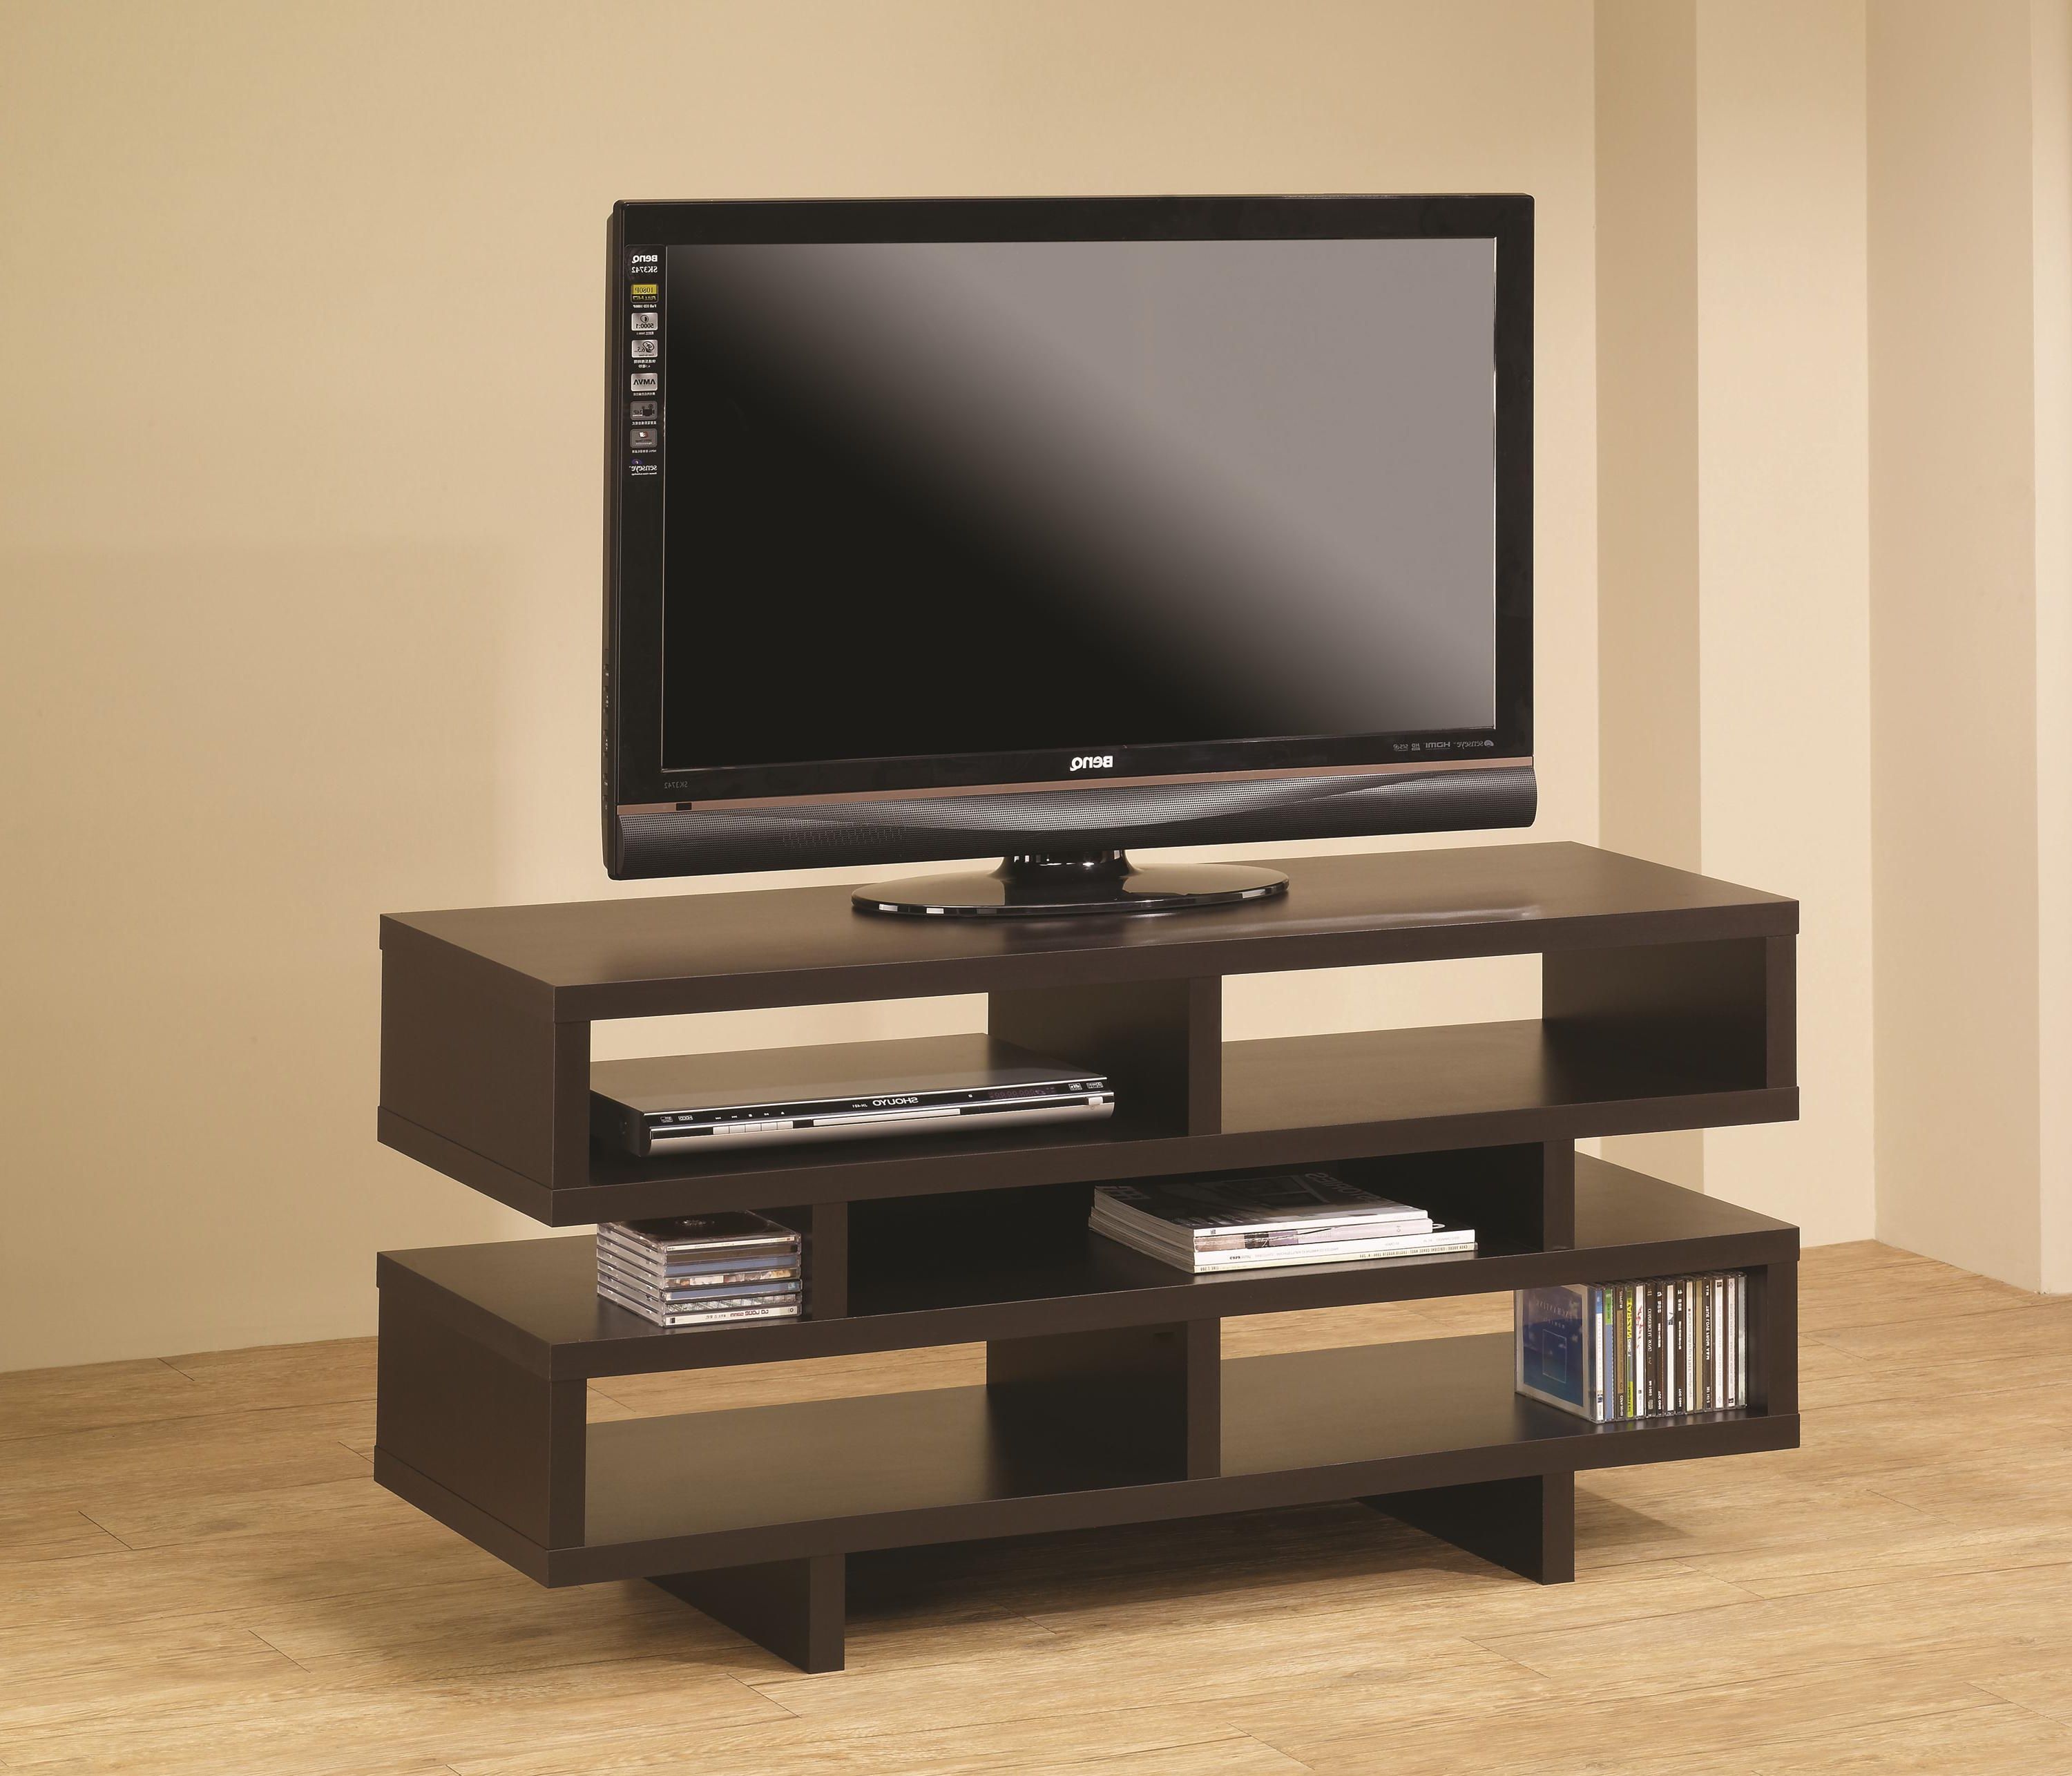 Coaster Tv Stands 700720 Contemporary Tv Console With Open Storage Intended For Latest Cheap Tv Tables (View 1 of 20)